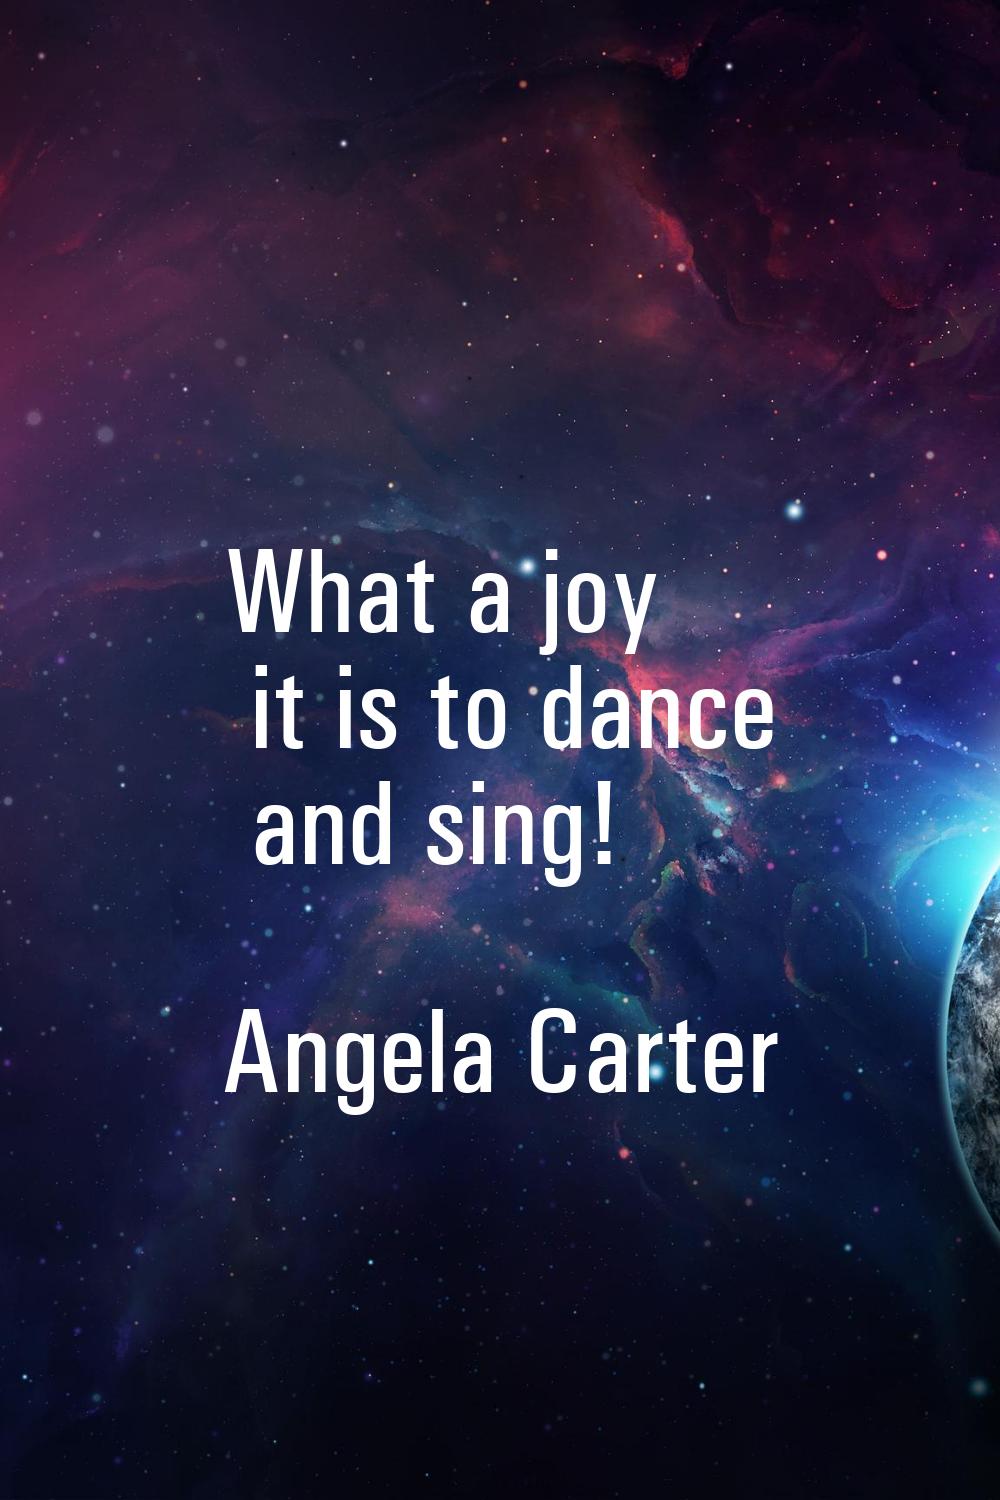 What a joy it is to dance and sing!